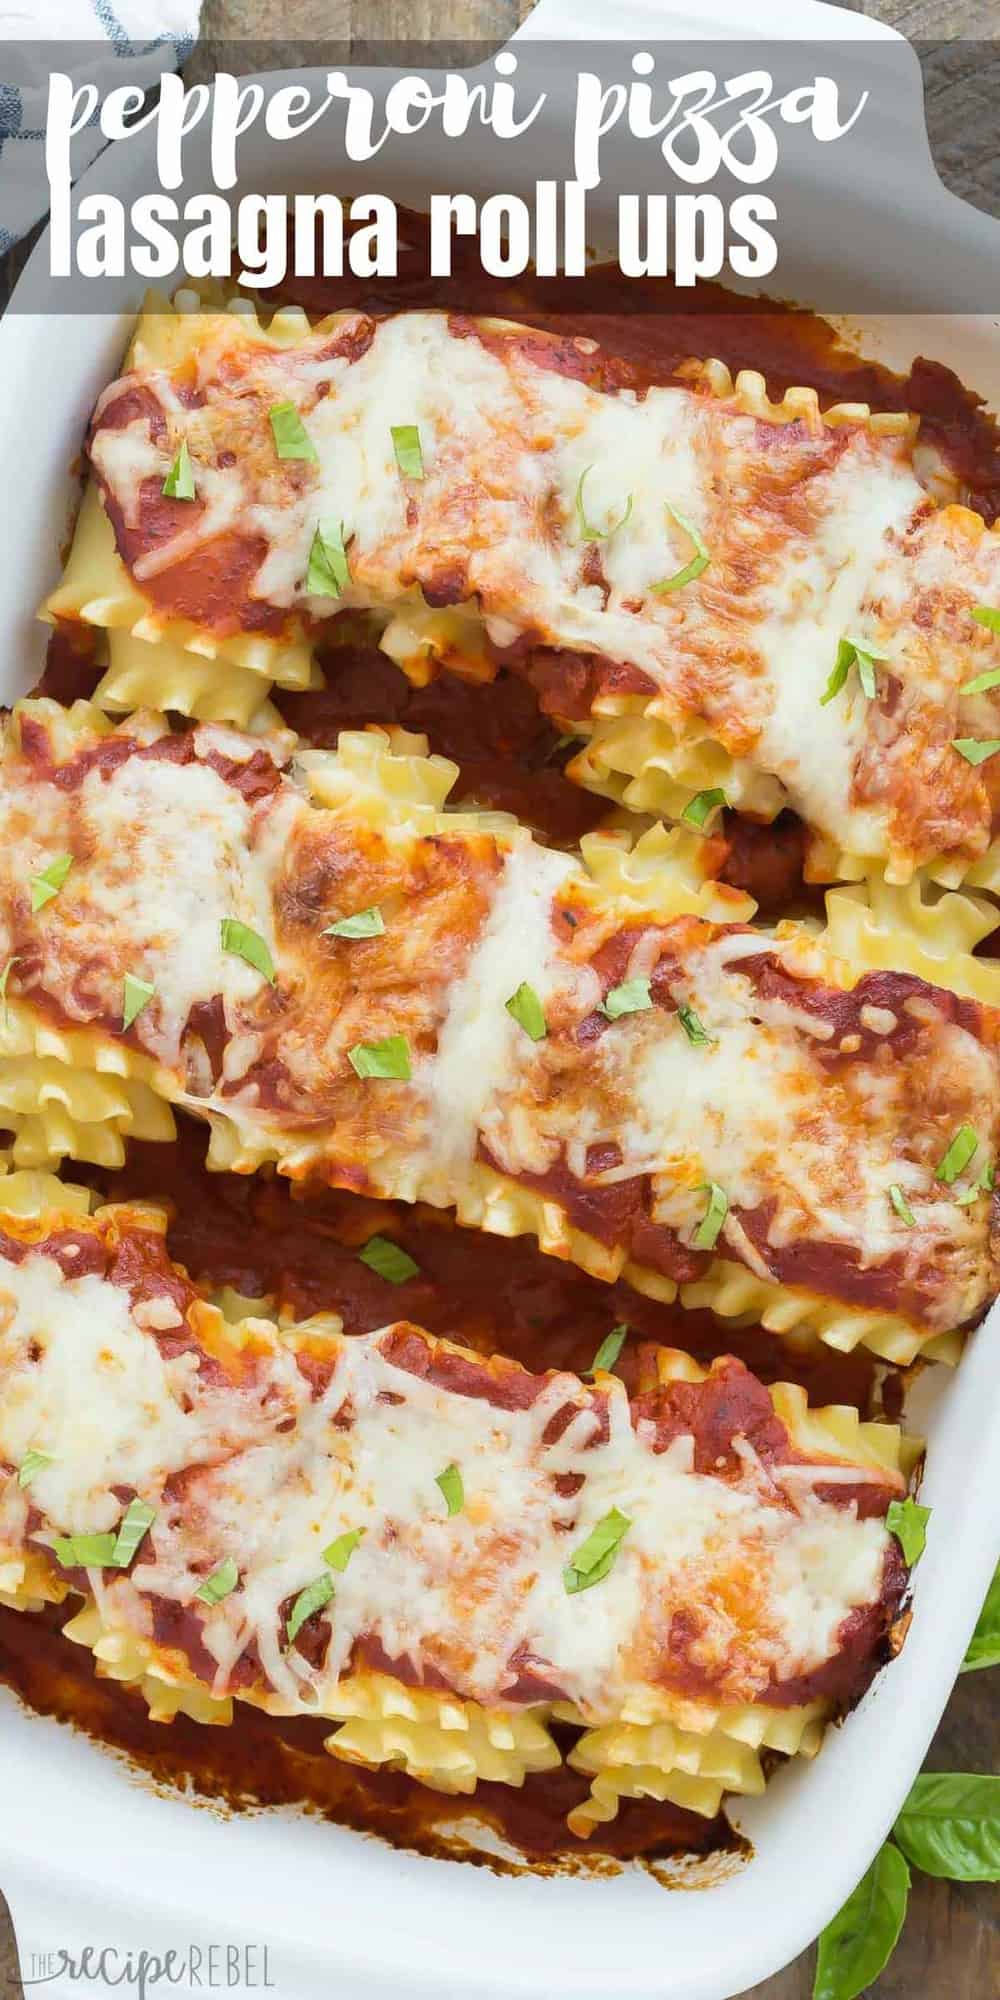 These Pepperoni Pizza Lasagna Roll Ups are an easy, kid friendly meal perfect for back to school! Make ahead, freezer meal and gluten-free options. | lasagna rolls | pasta recipe | make ahead | meal prep | casserole | easy dinner recipe | kid friendly | family friendly